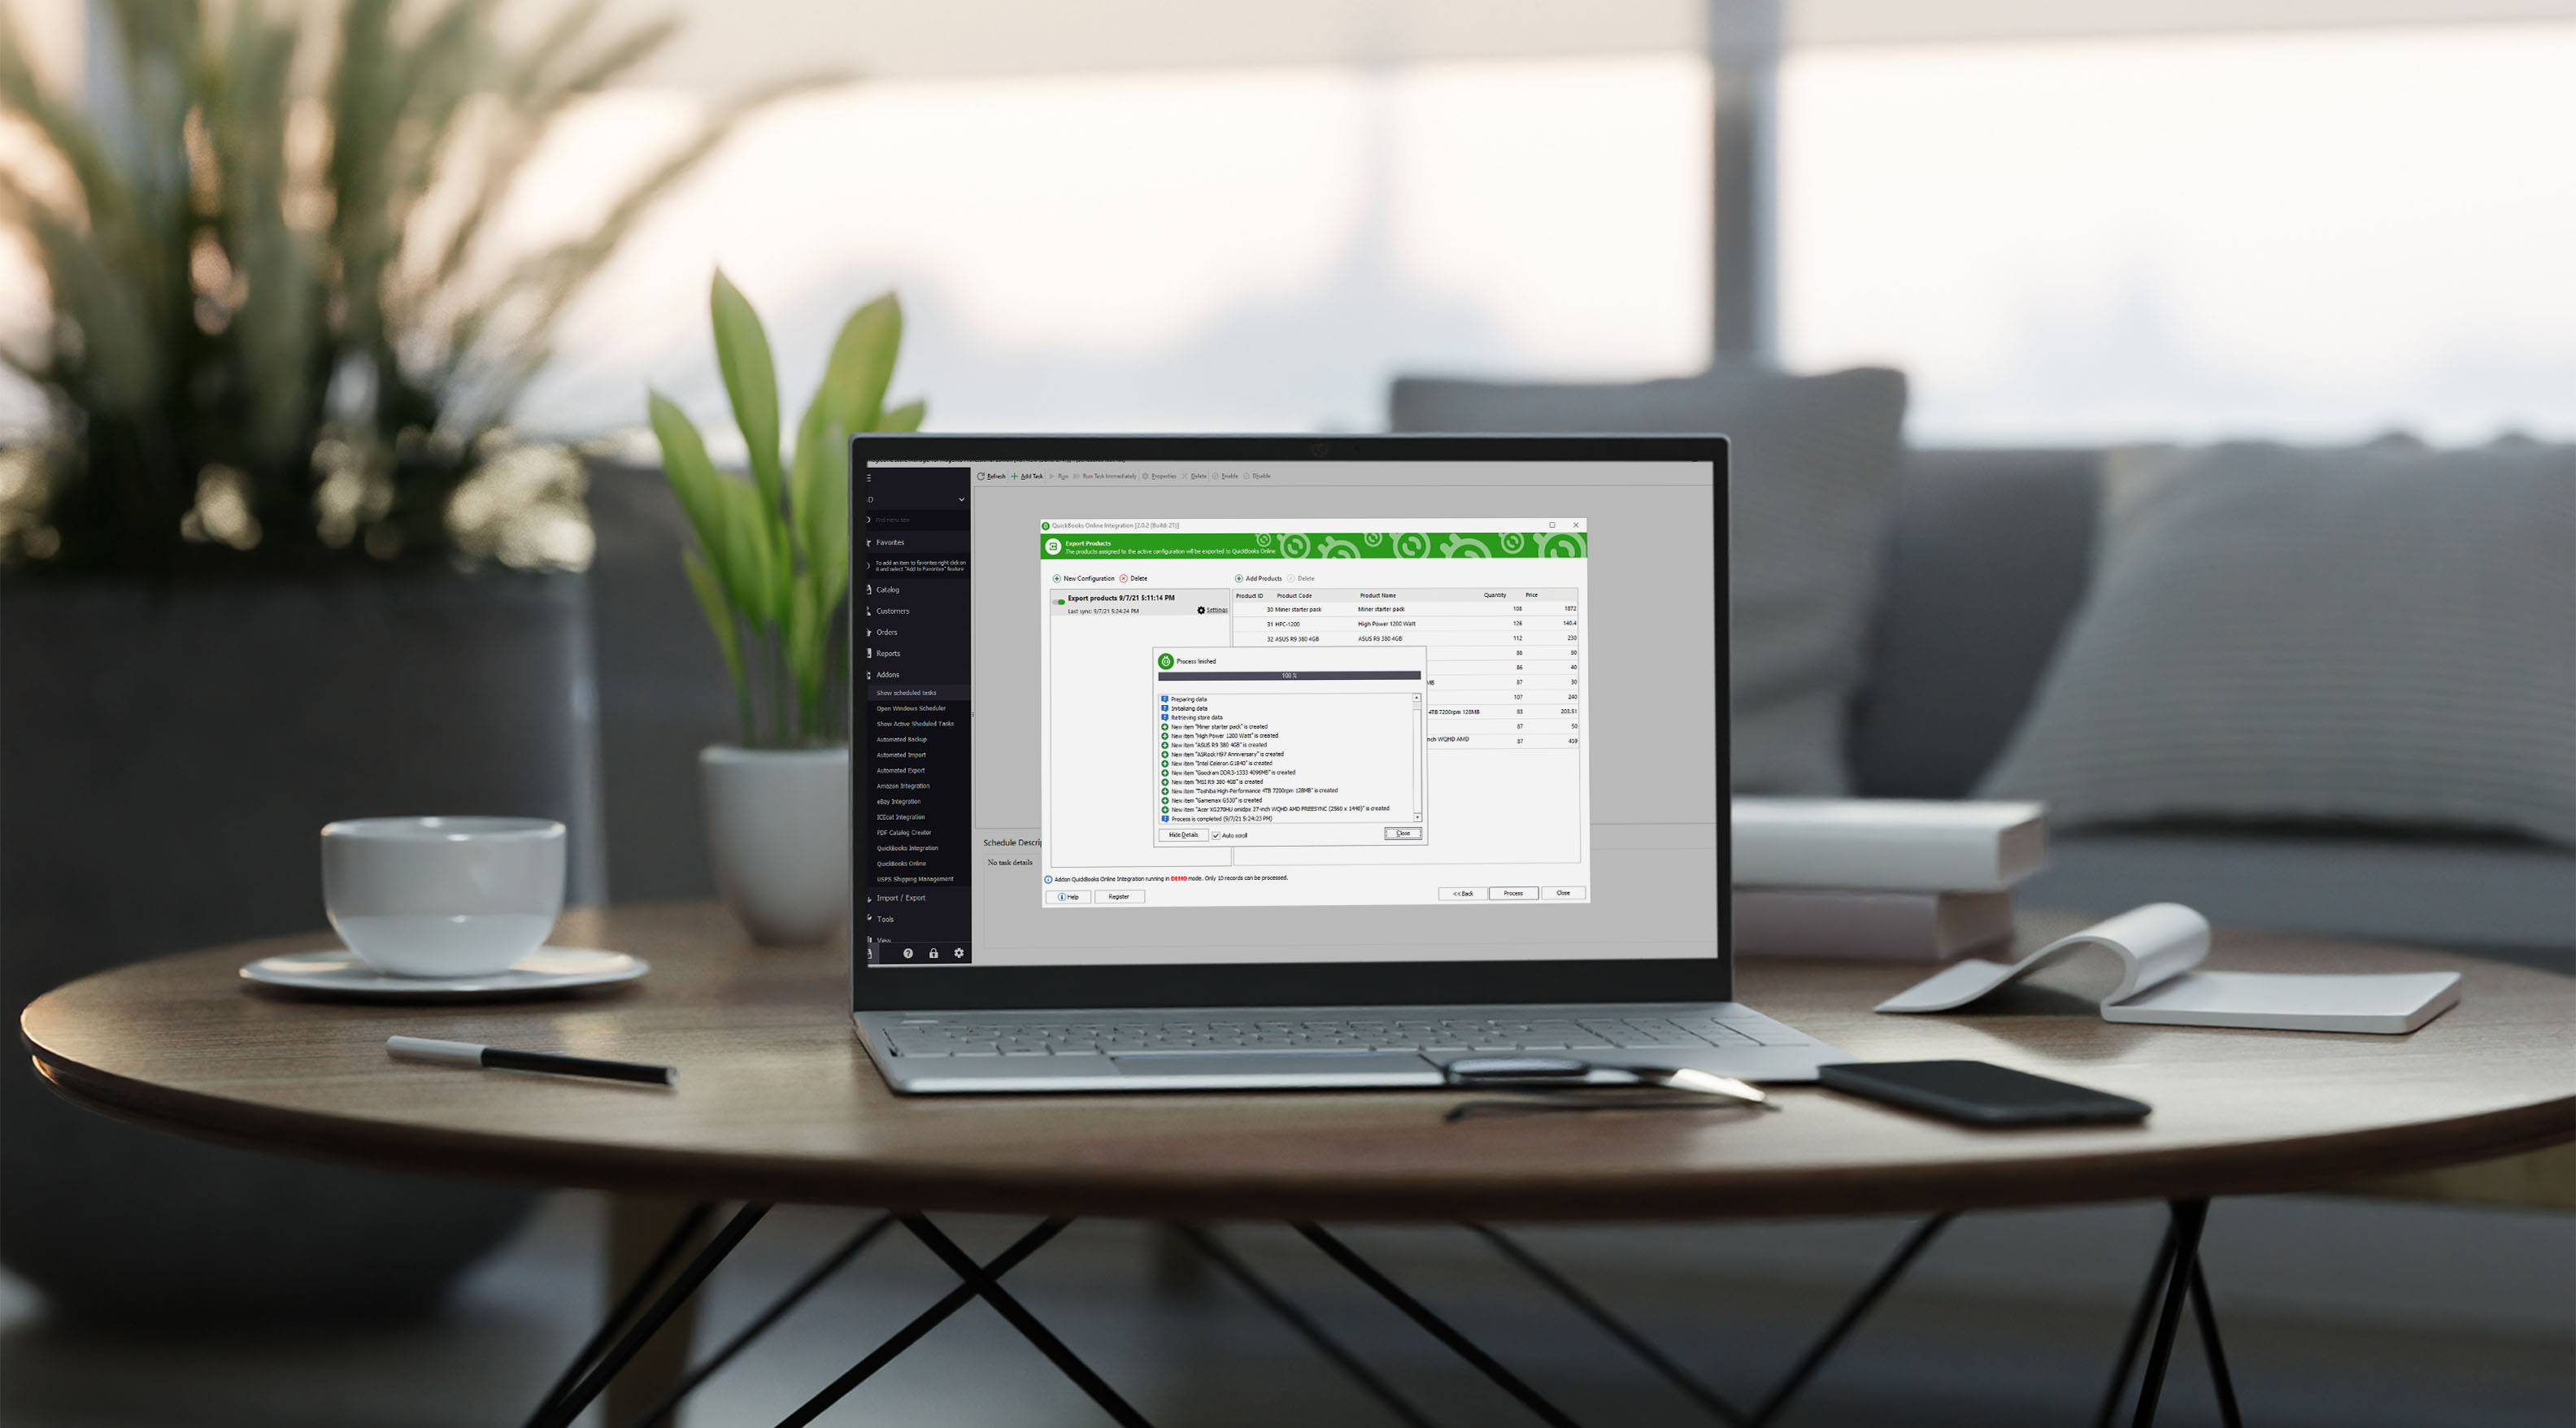 Magento 2 QuickBooks Online Integration Launched on a Laptop